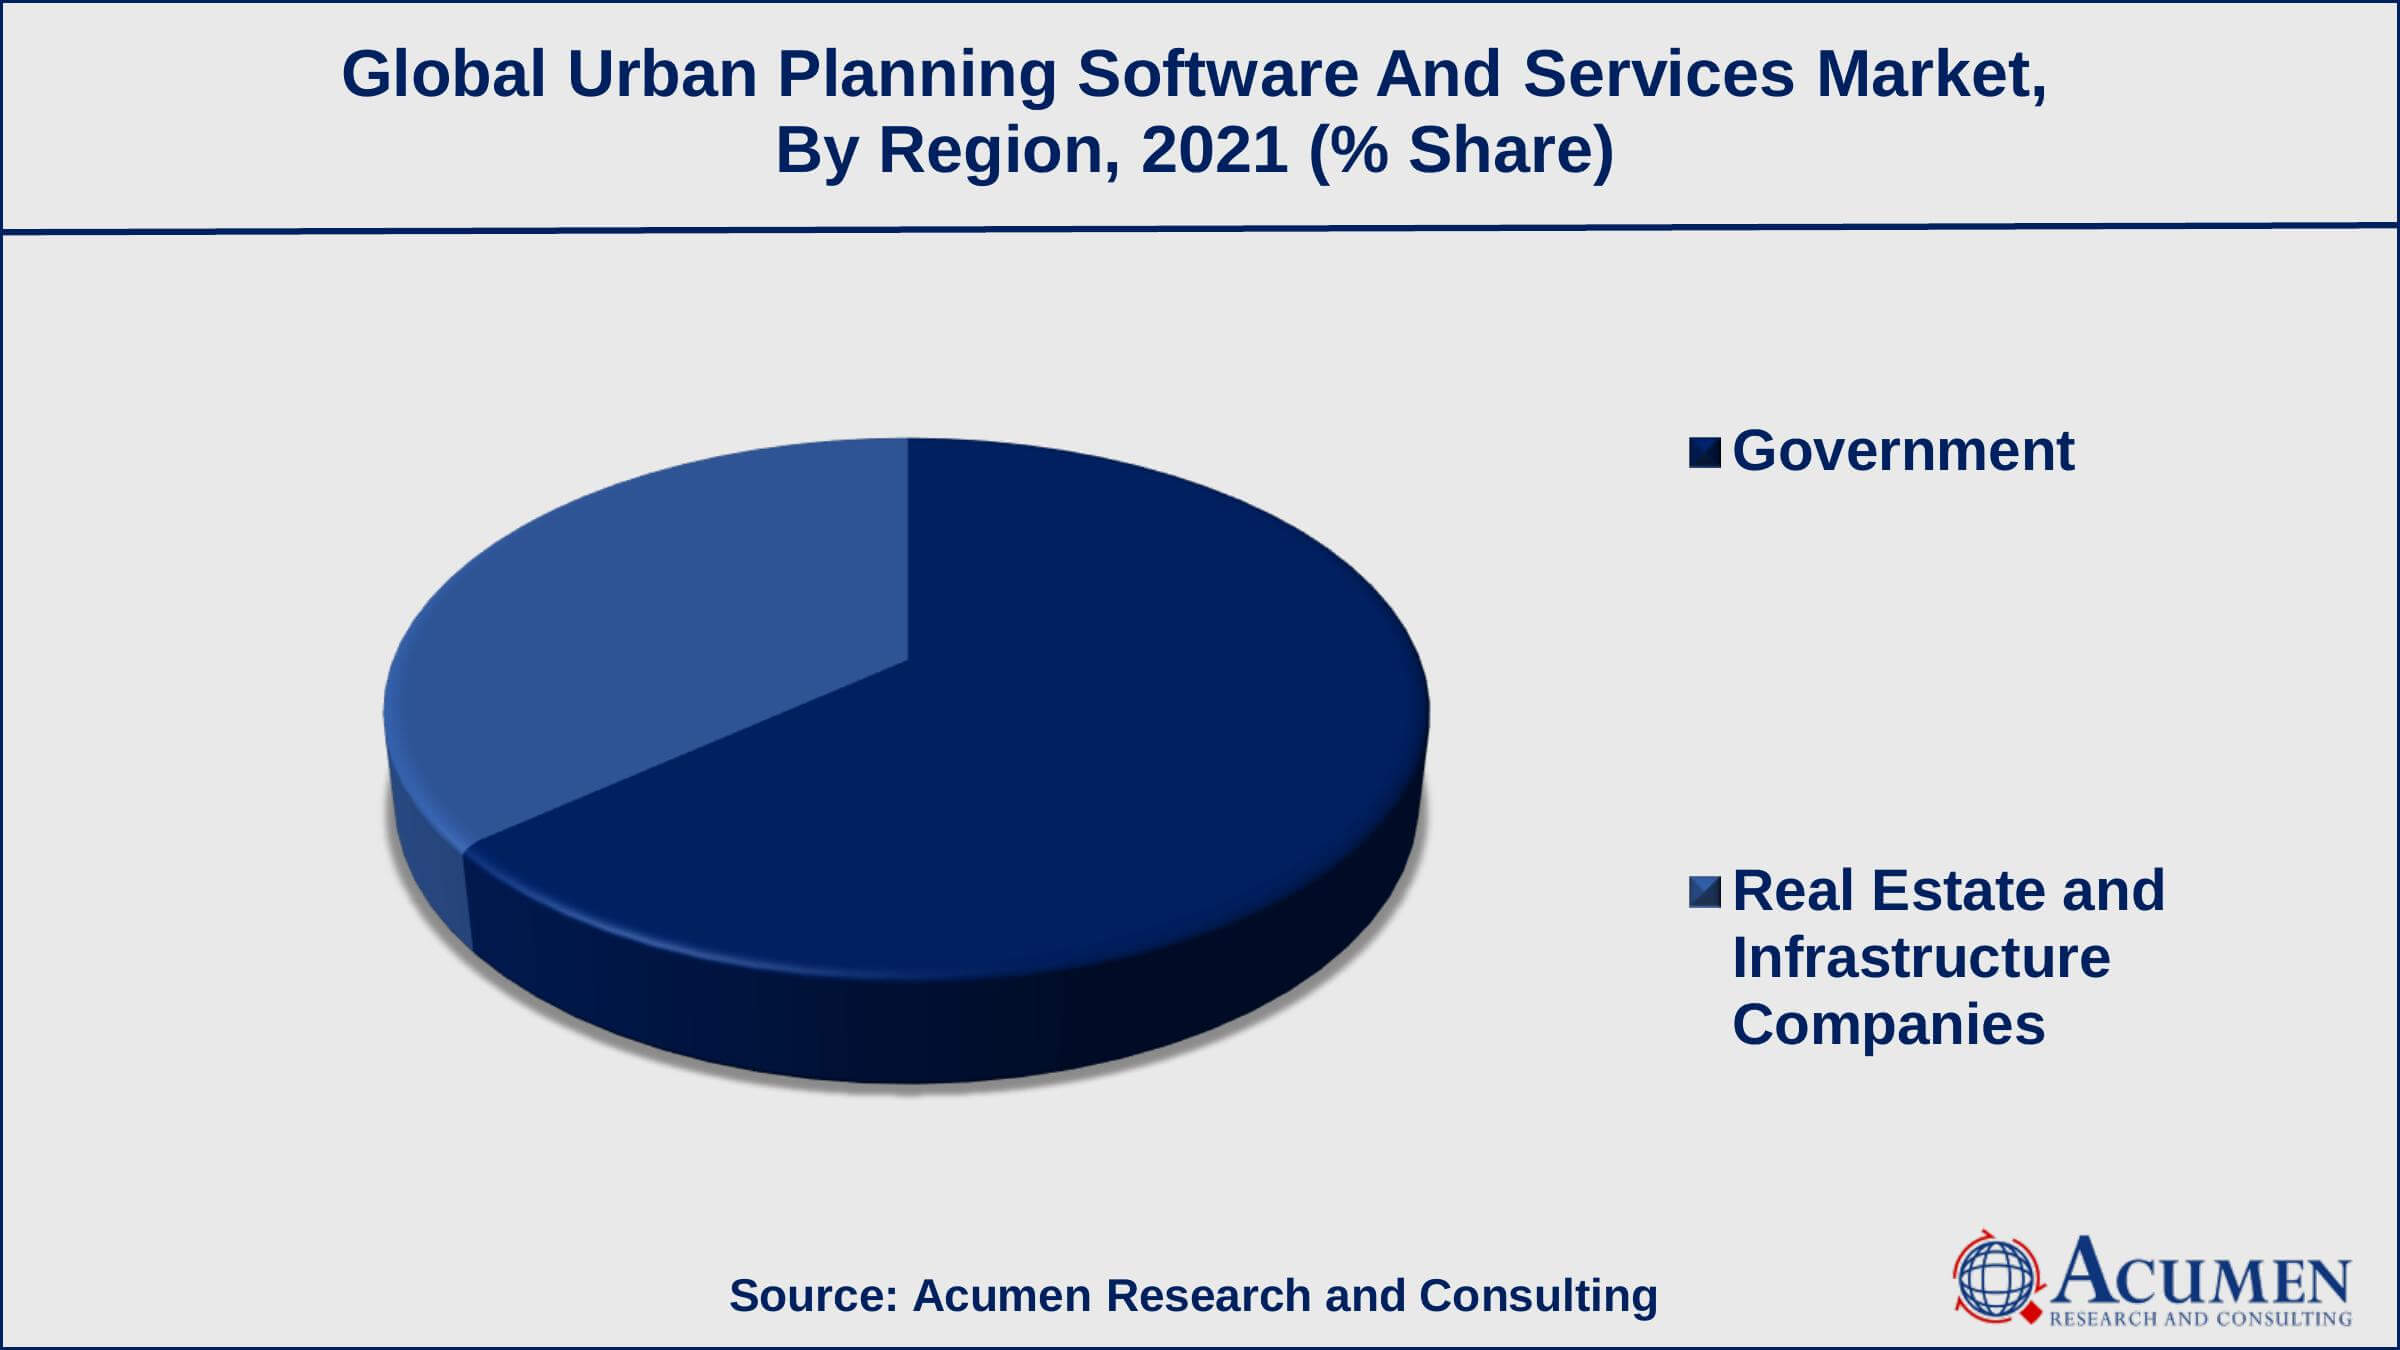 Global Urban Planning Software and Services Market Dynamics